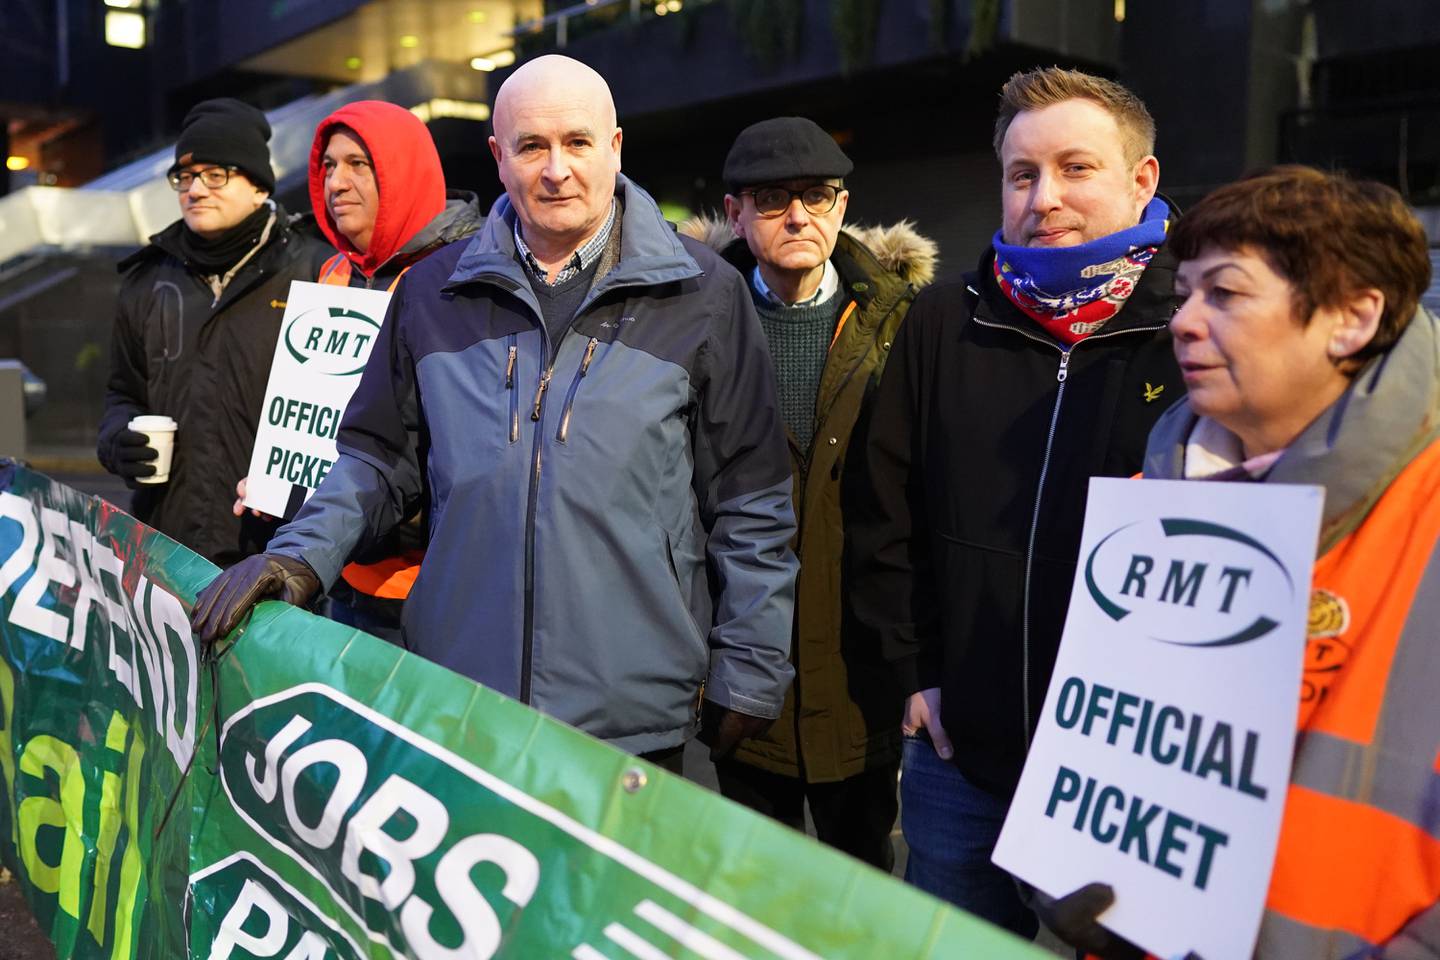 RMT boss Mick Lynch, third from left, on a picket line at London Euston station. PA 